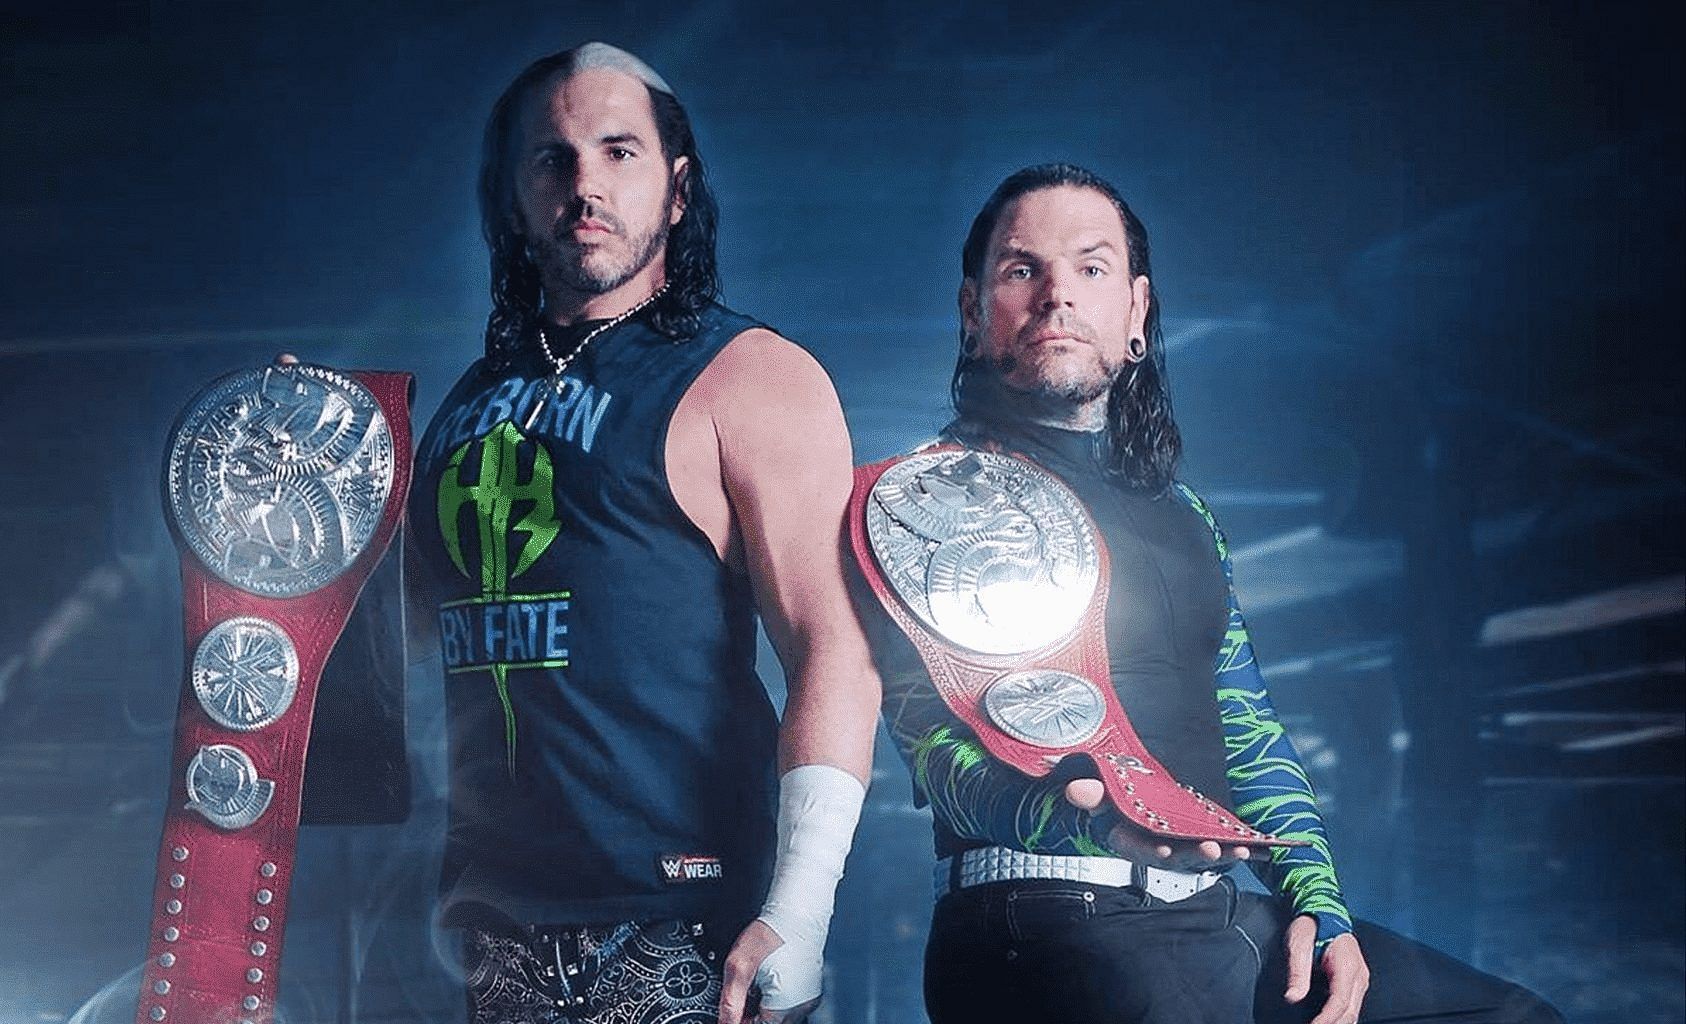 There are still dream matches left for The Hardy Boyz in WWE